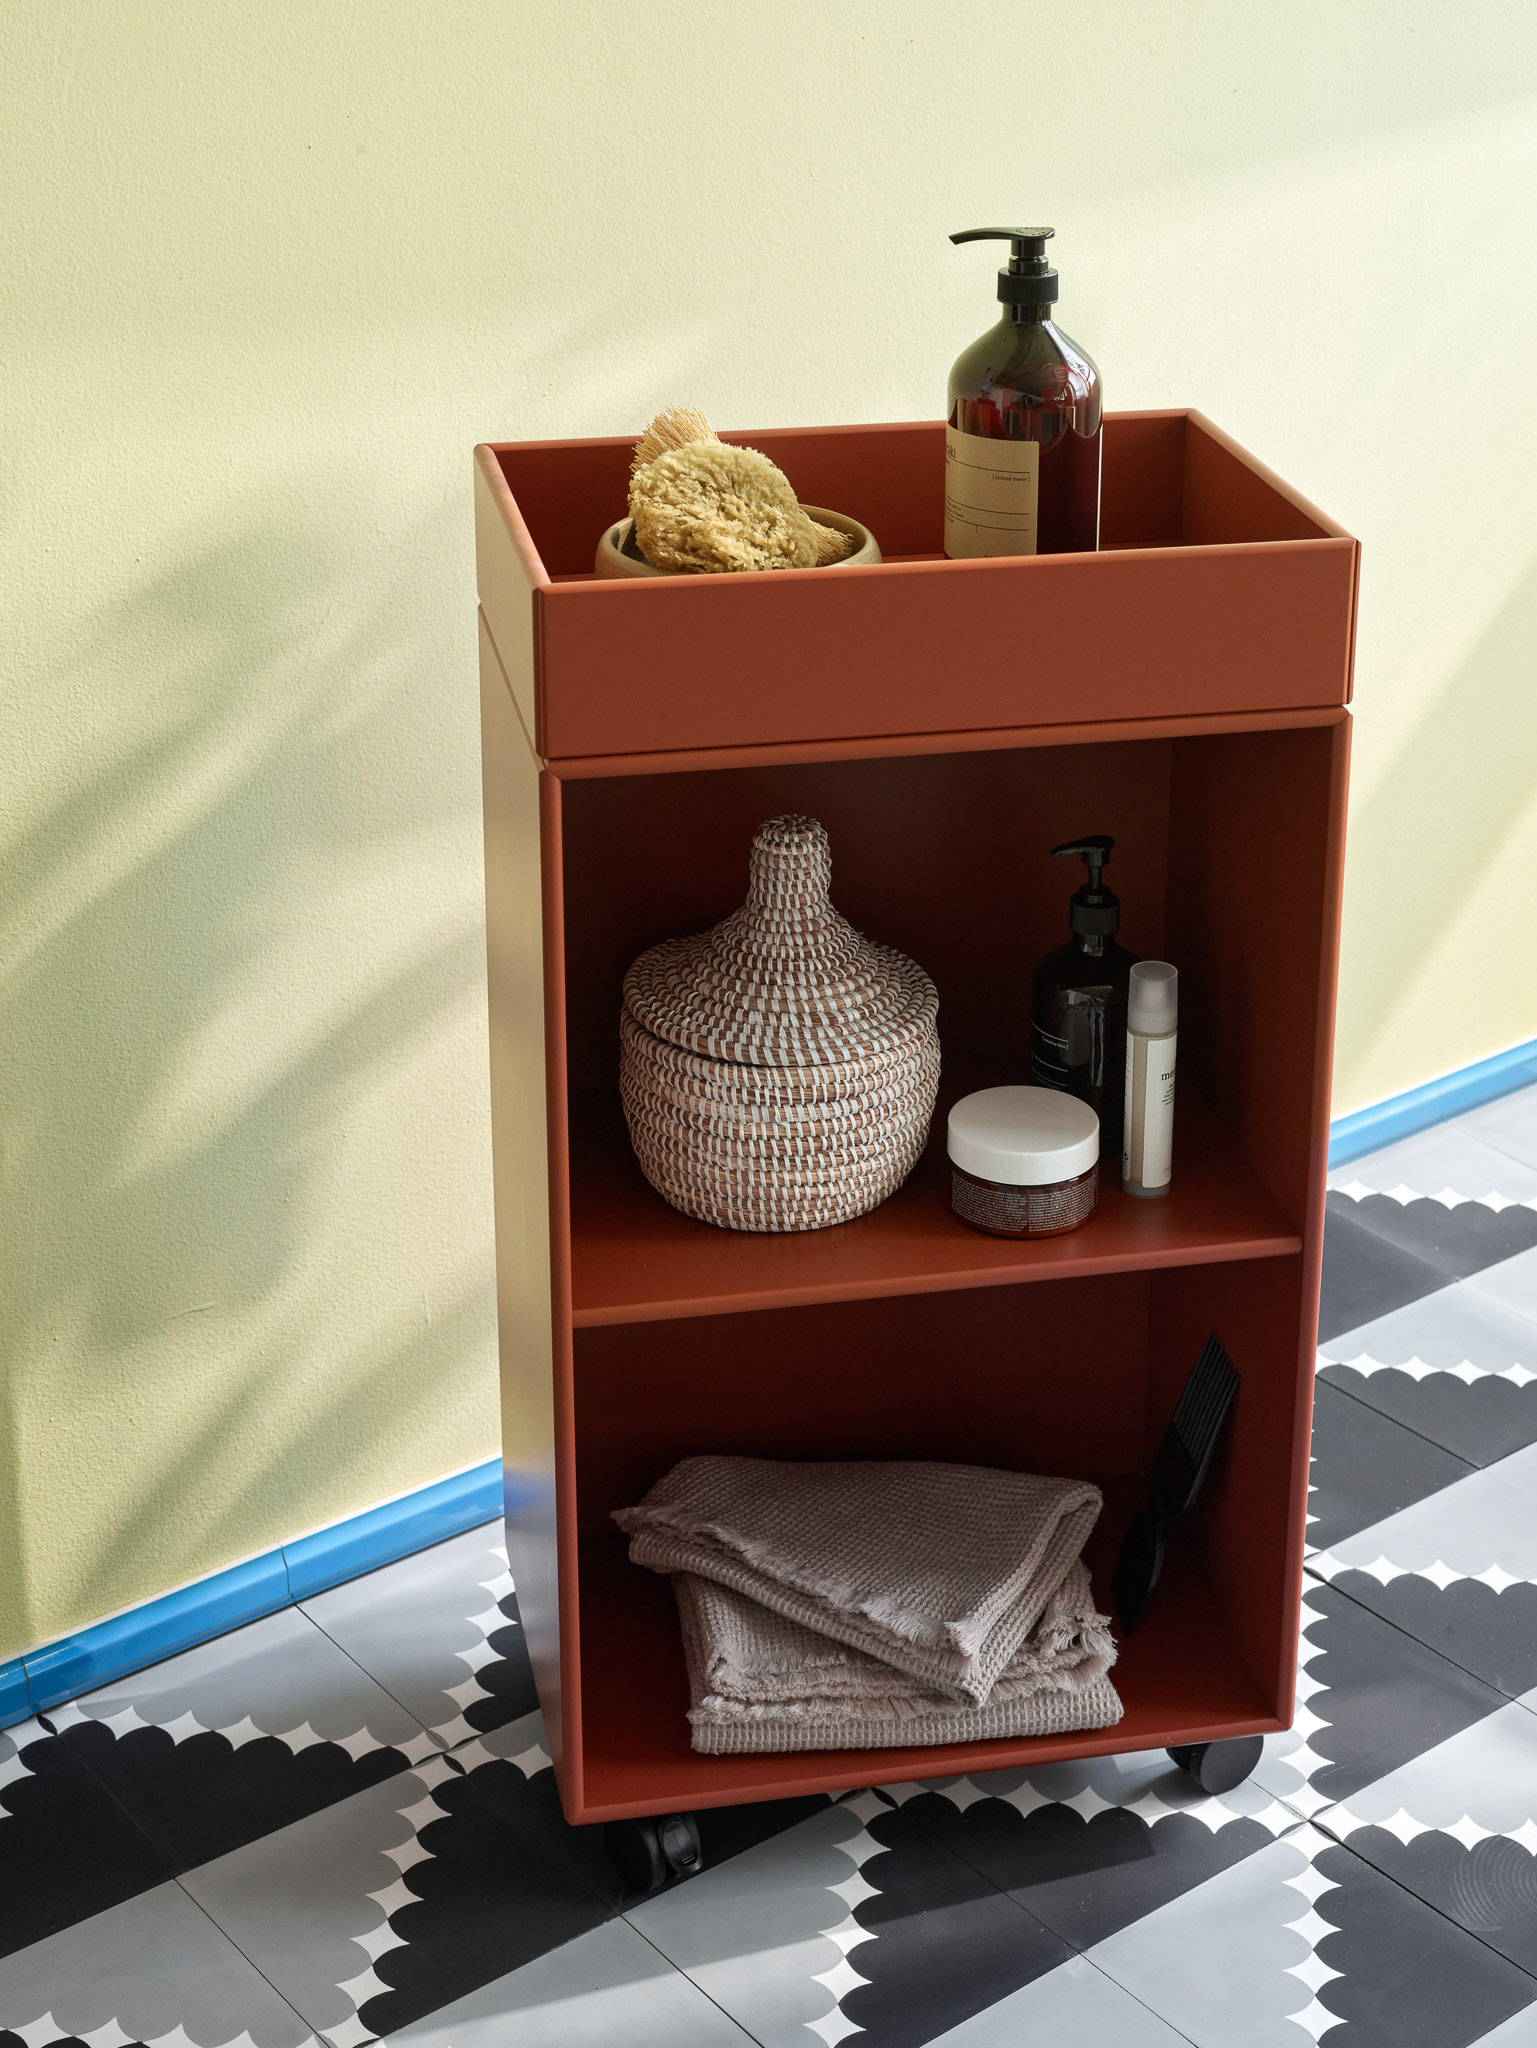 MONTANA // PREPPY - PREPPY BATHROOM TROLLEY WITH WHEELS | 09 NORDIC | WITH ROLLERS